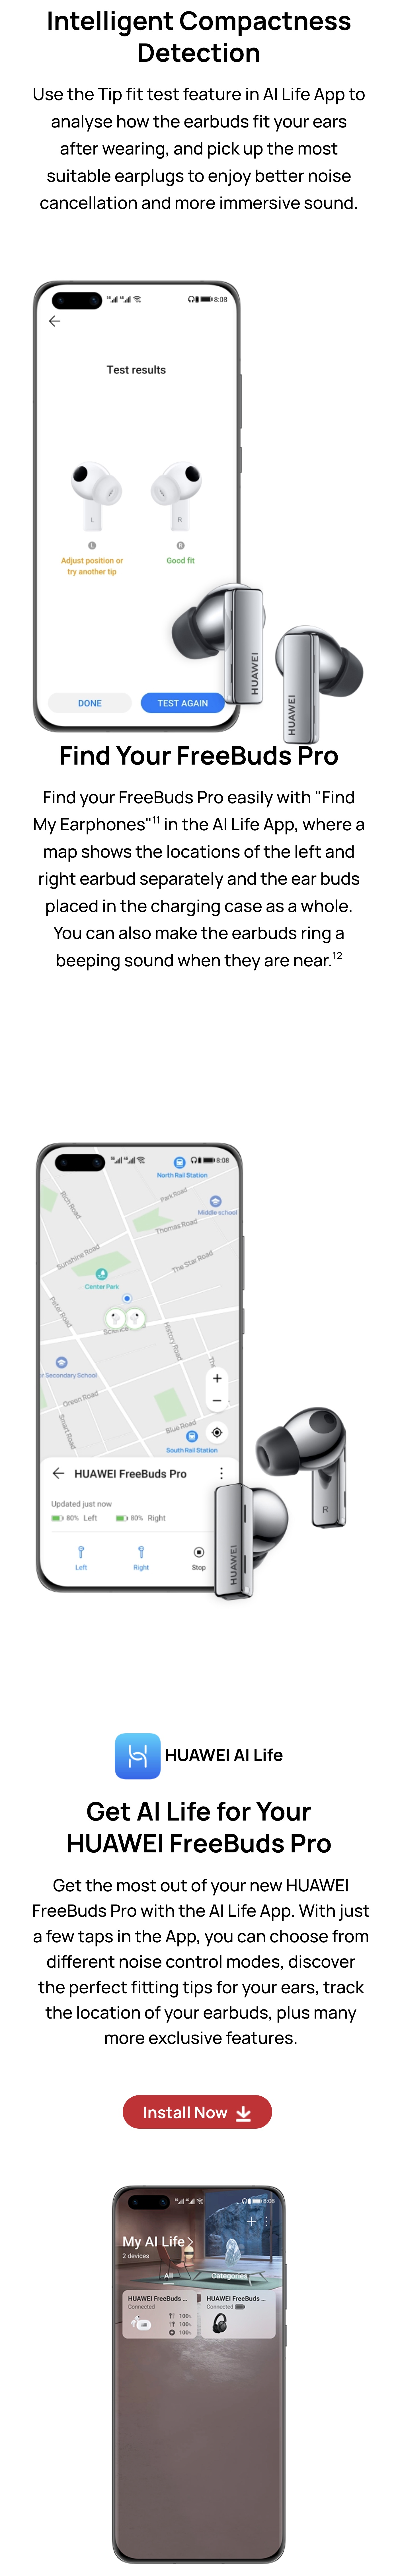 Huawei-FreeBuds-Pro-Active-Noise-Cancelling-True-Wireless-Earbuds-Description-8